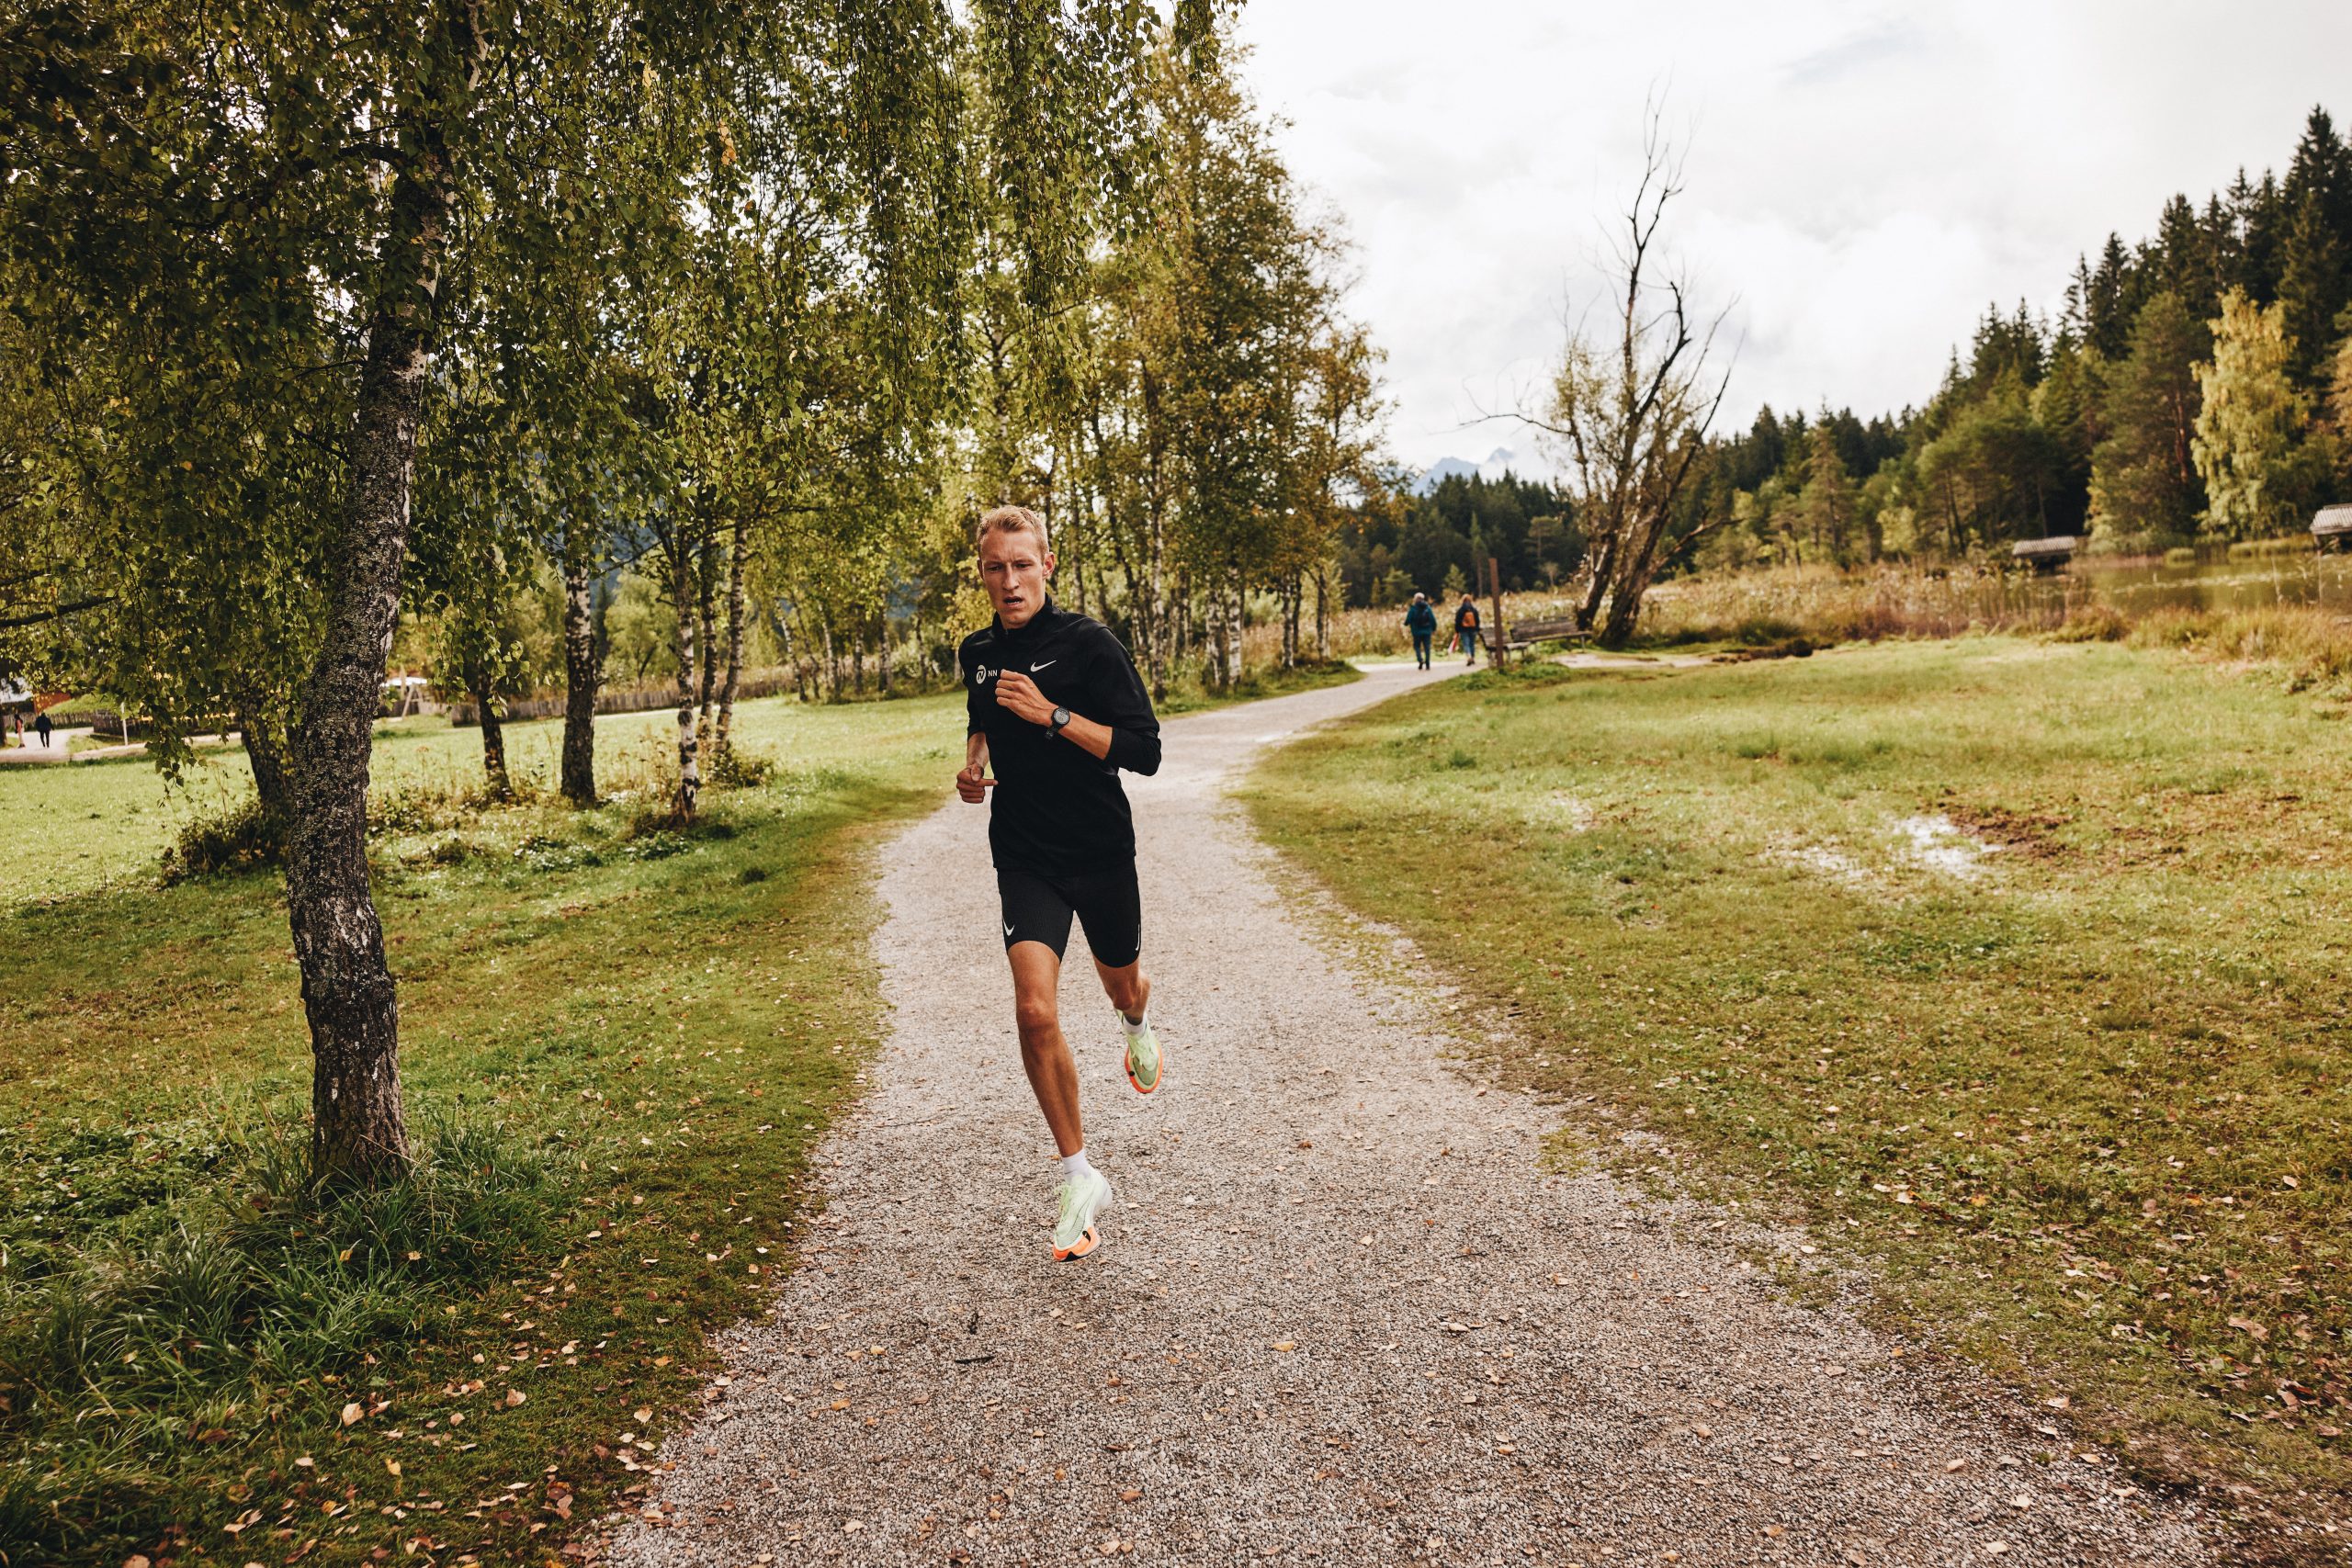 Björn Koreman runs on a gravel trail through the woods wearing shorts and a long-sleeve top.